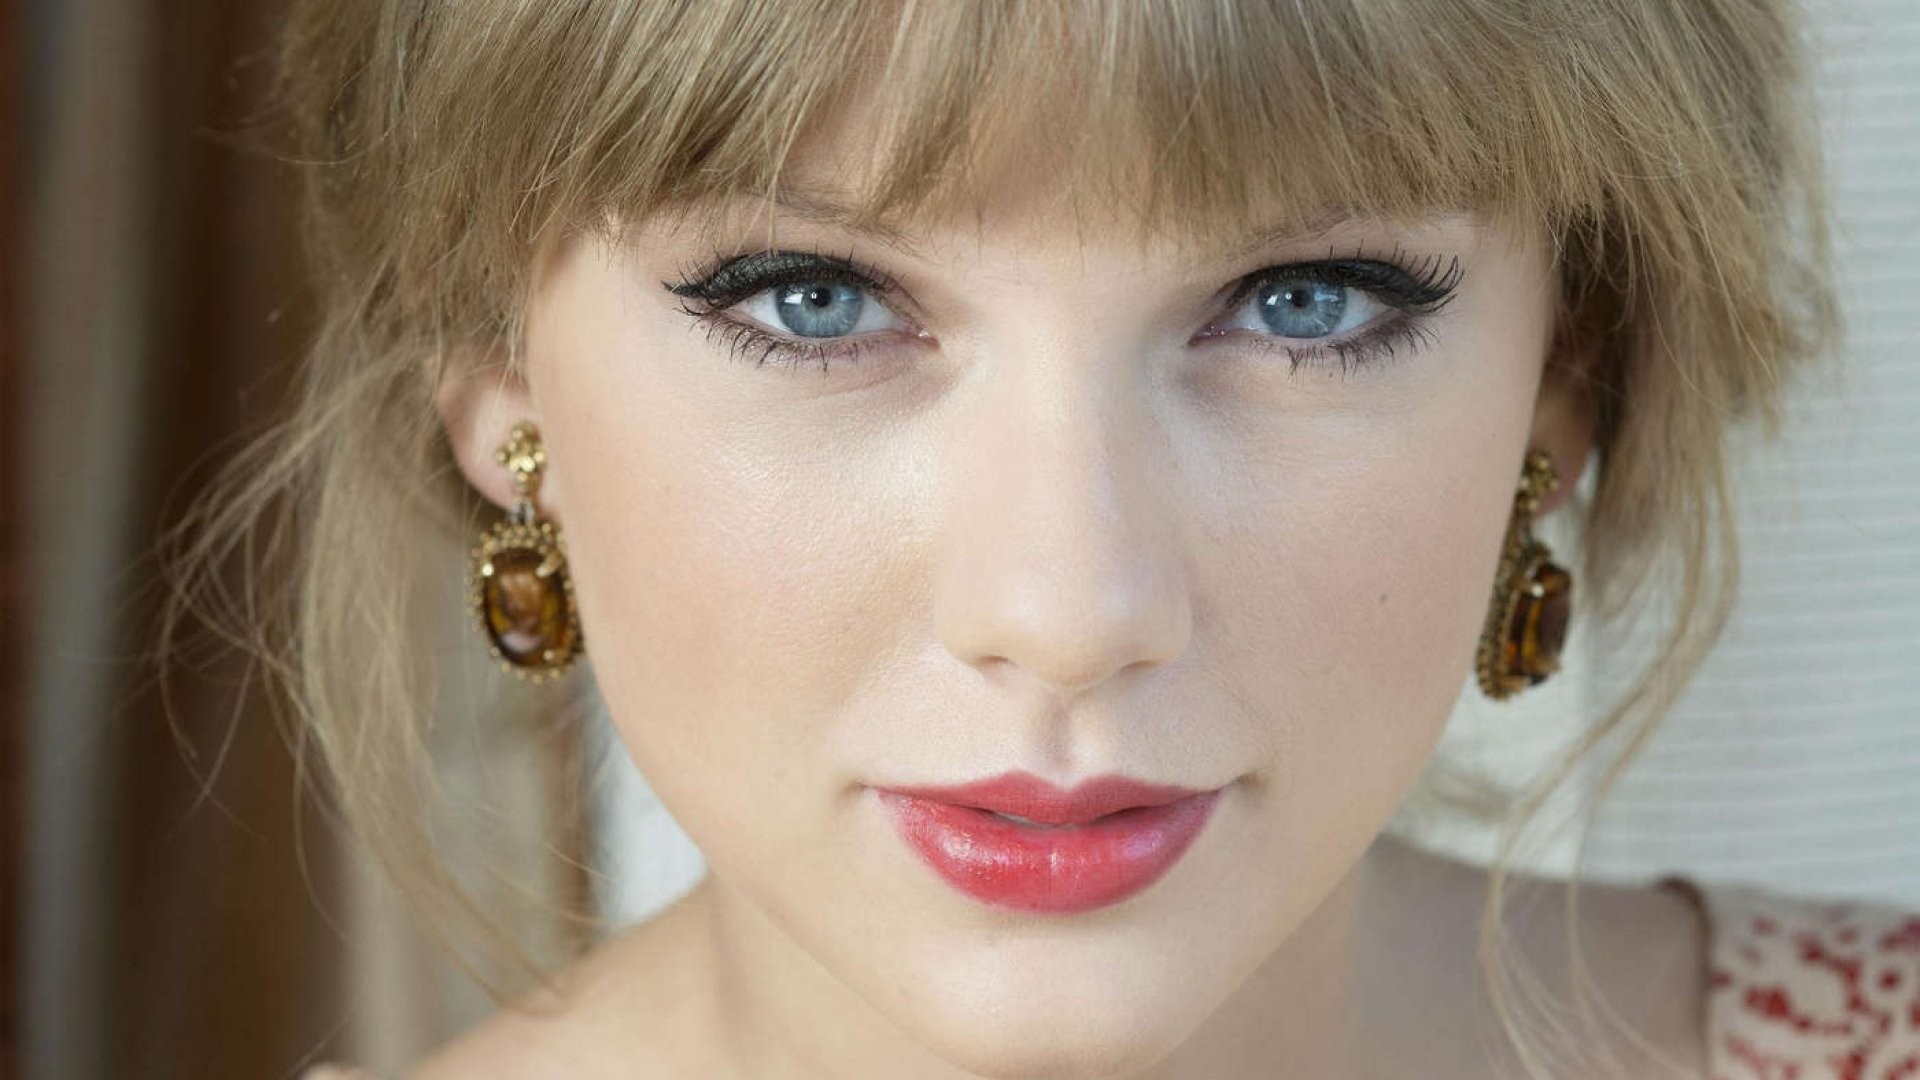 1920x1080 Celebrity taylor swift singer girl blonde country music pictures .